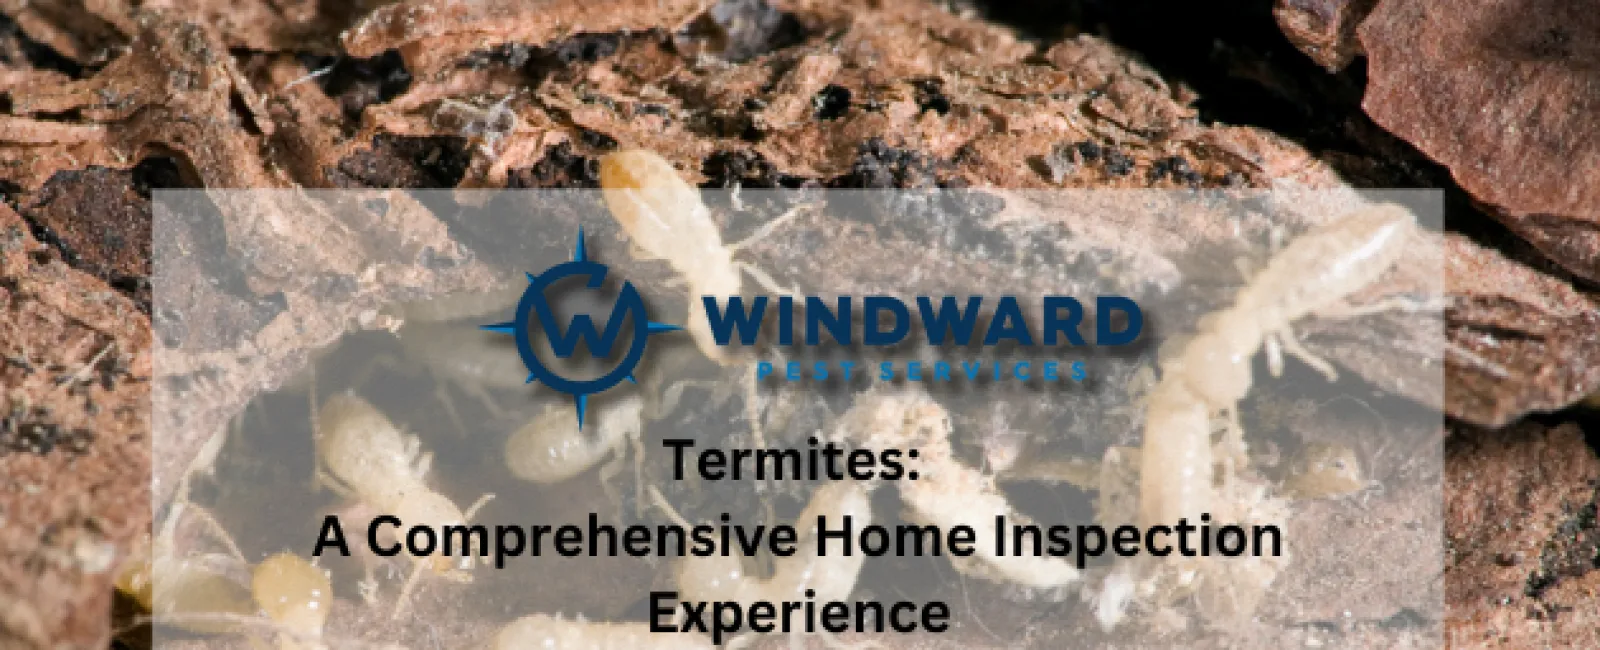 Termites: A Comprehensive Home Inspection Experience